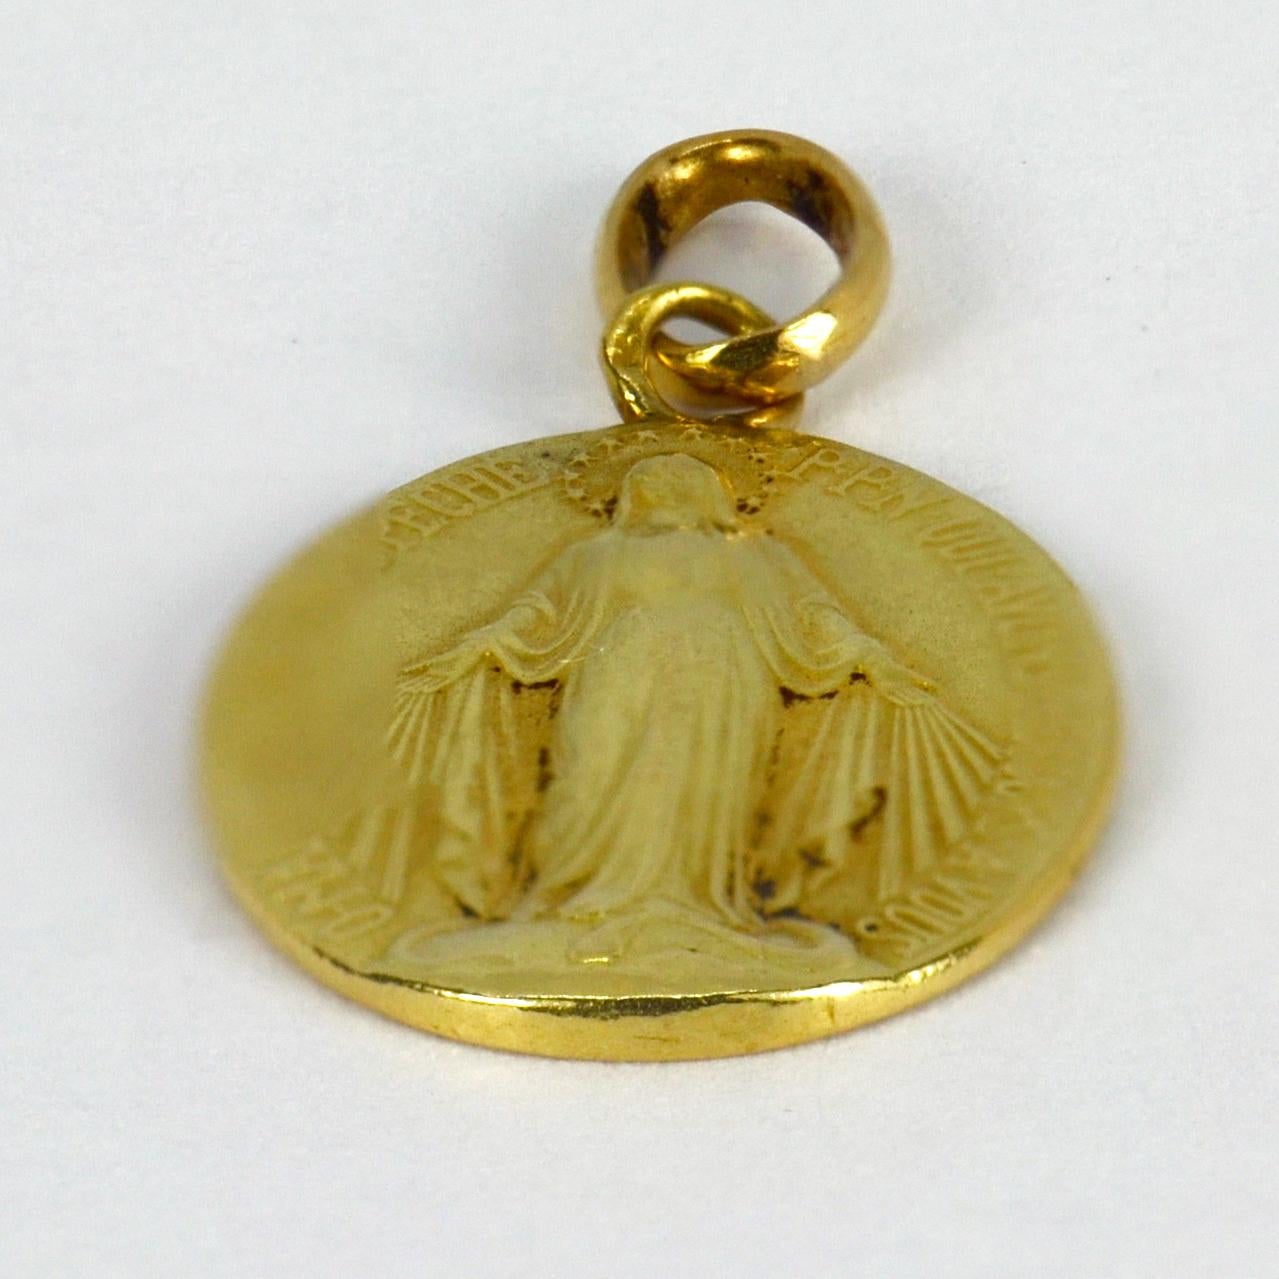 A French 18 karat (18K) yellow gold charm pendant designed as the Miraculous Medal. The medal depicts the Virgin Mary standing on a globe, crushing a serpent beneath her feet with rays shooting from her hands to symbolise the graces she bestows on